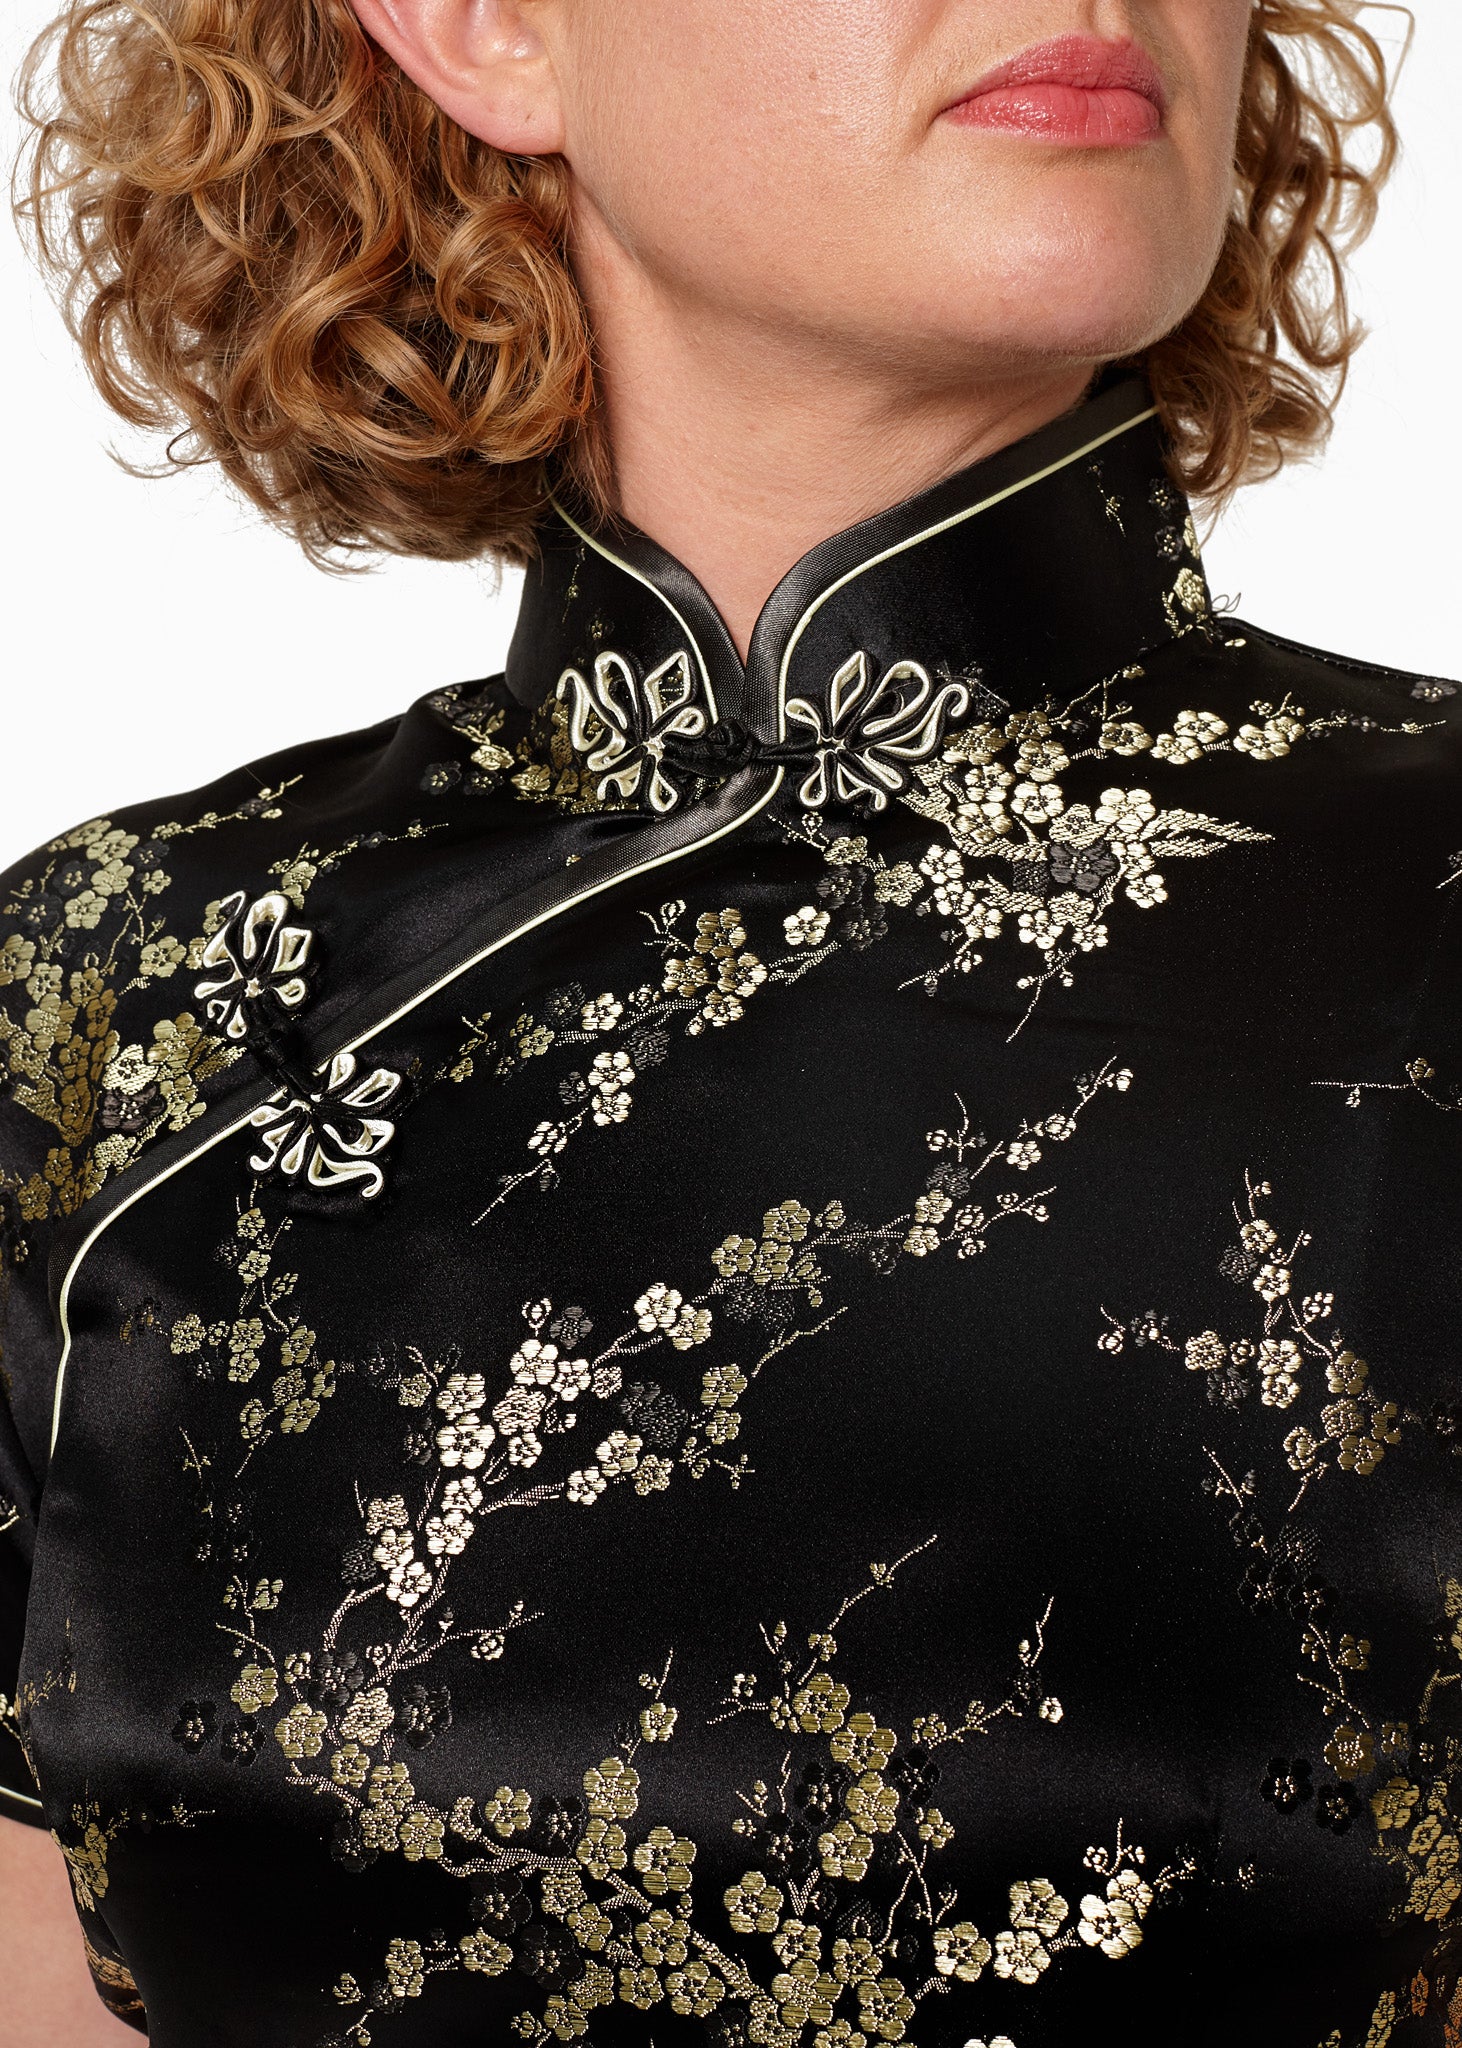 Bound edge mandarin collar and aysmmetric fastening which closes with hand stitched flower and knot frog fastenings in an accent shade